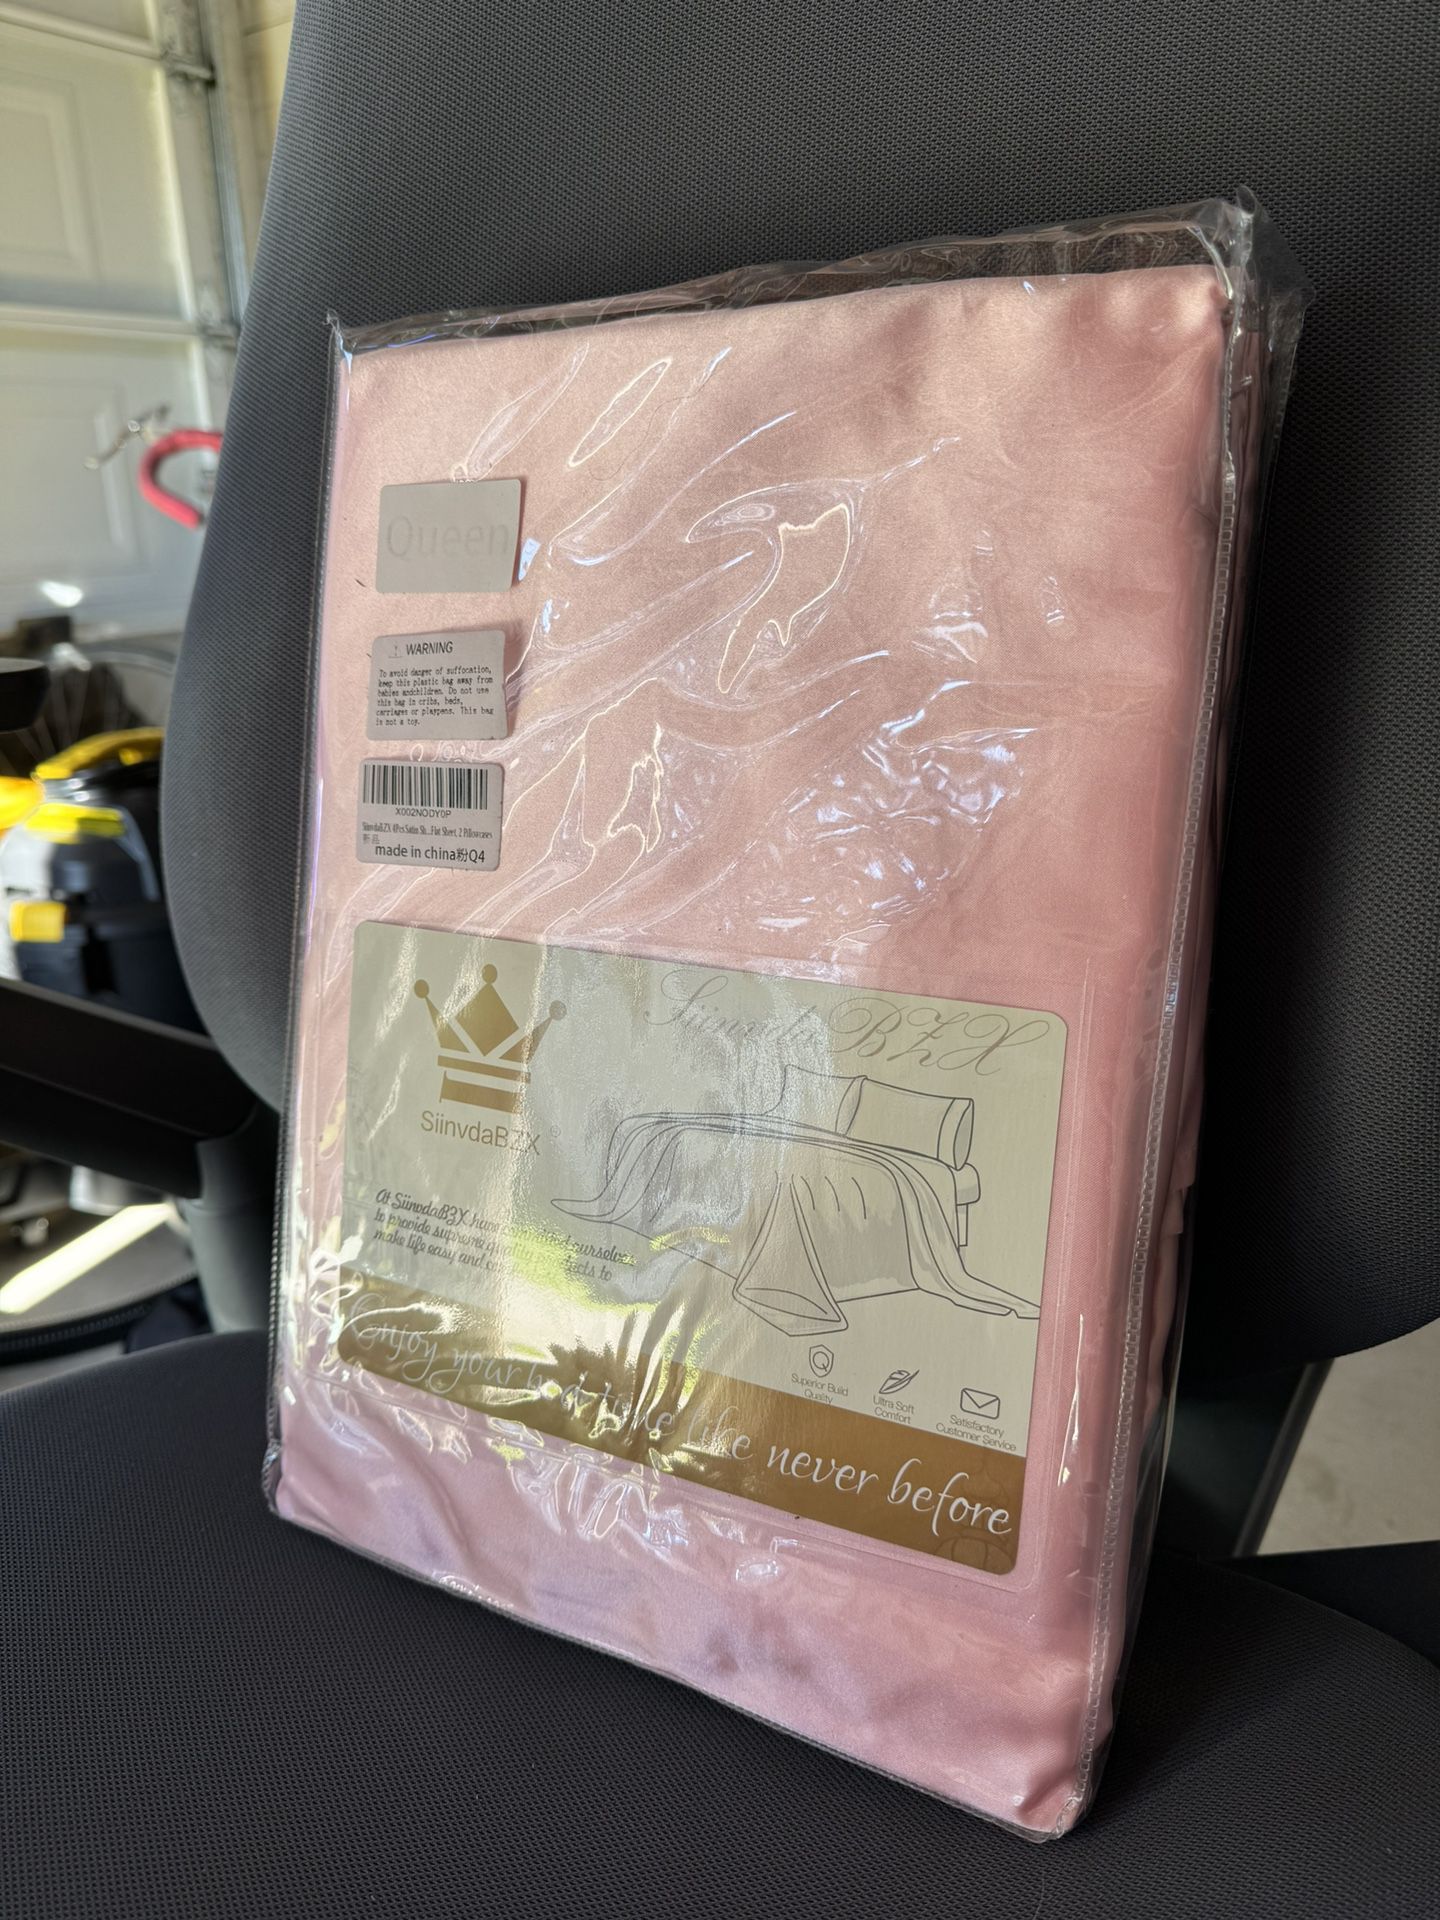 Queen-Sized, Pink Satin Bed Sheets - One Fitted Sheet, One Flat Sheet